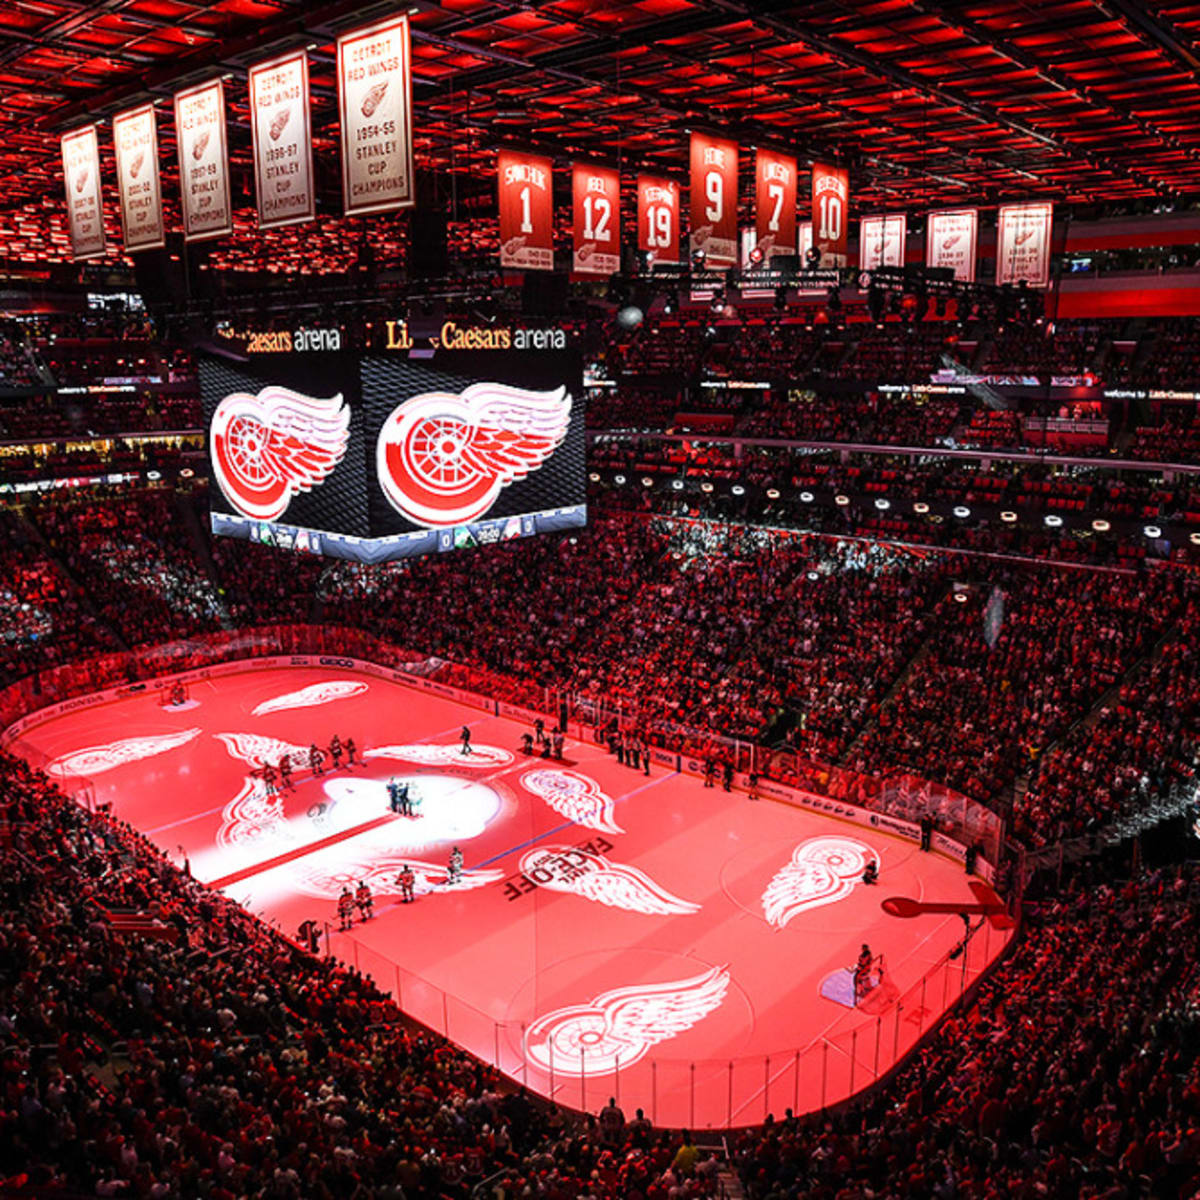 And Then There Were Two: Little Caesars Arena, Red Wings Home, Yet to See  Playoff Action